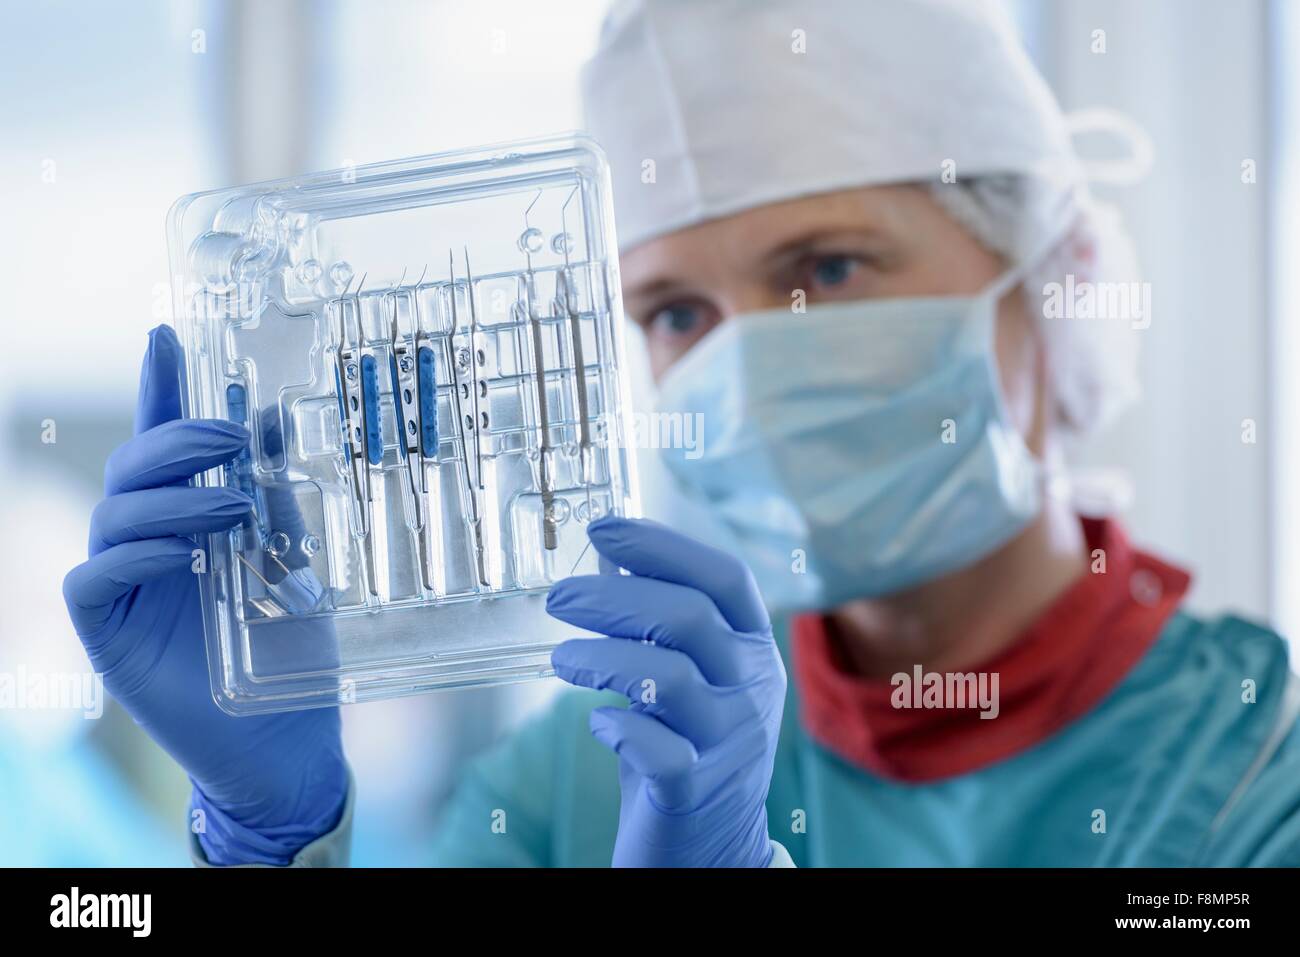 Worker inspecting surgical instruments in clean room of surgical instruments factory, close up Stock Photo